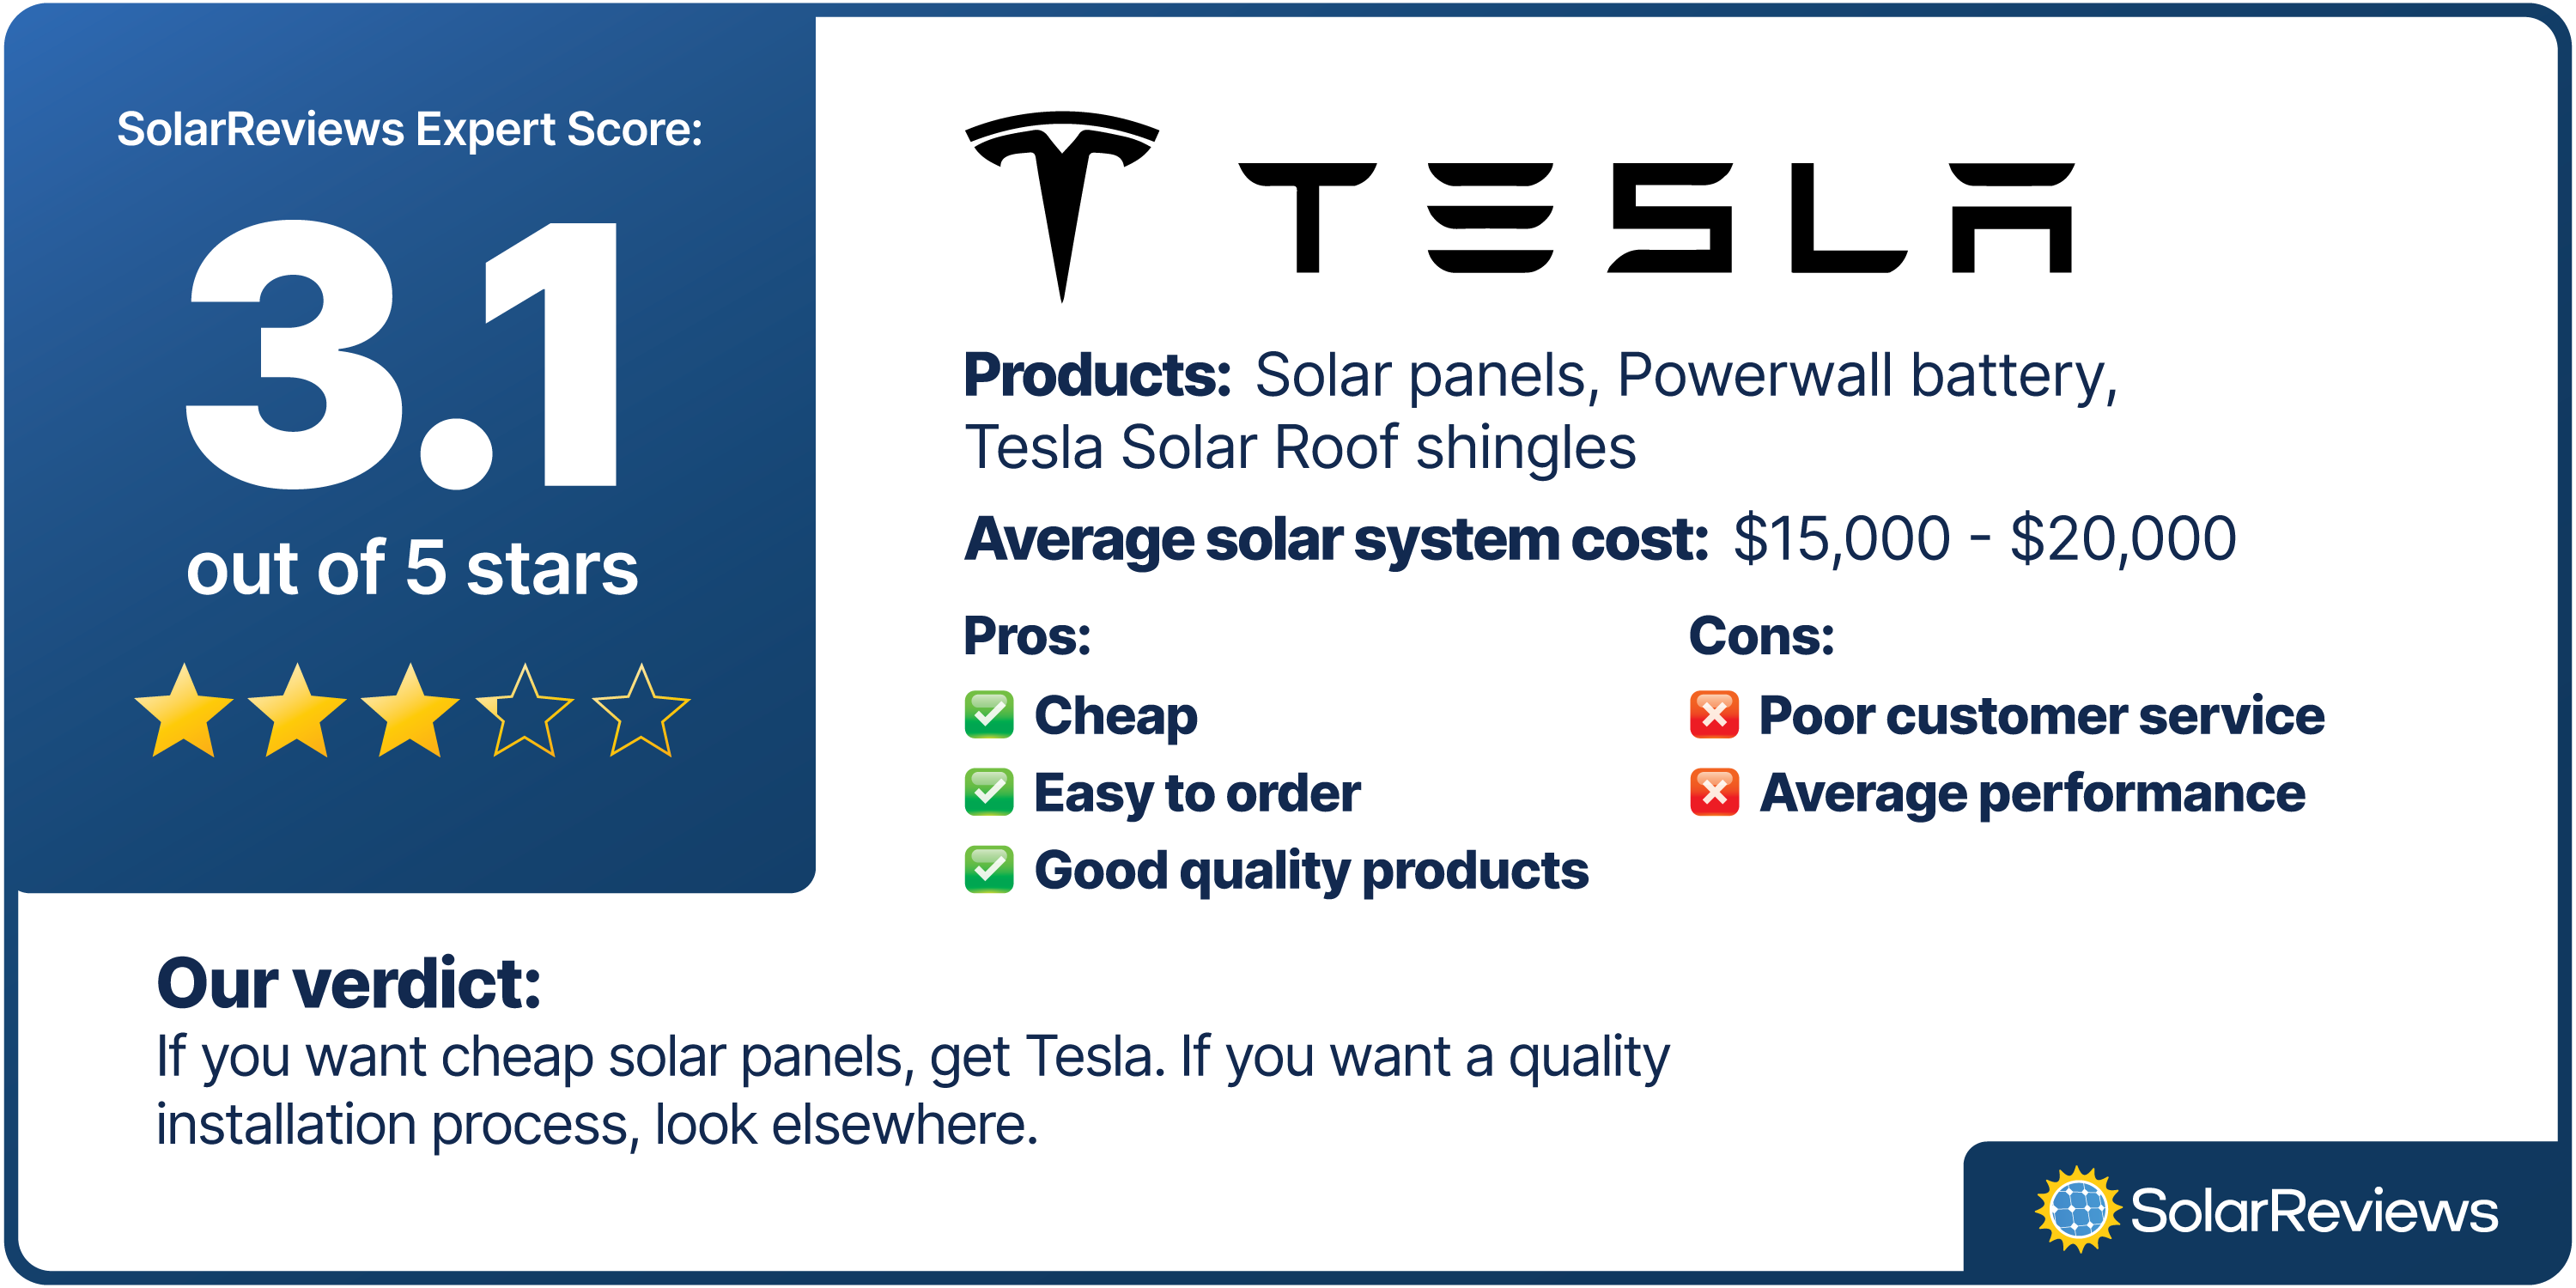 SolarReviews experts scored Tesla a 3.1 out of 5 stars. Tesla Energy's products are good quality, easy to order, and affordable, but the company's poor customer service brought its score down. If you want cheap solar panels, get Tesla. If you want a quality installation process, look elsewhere. 